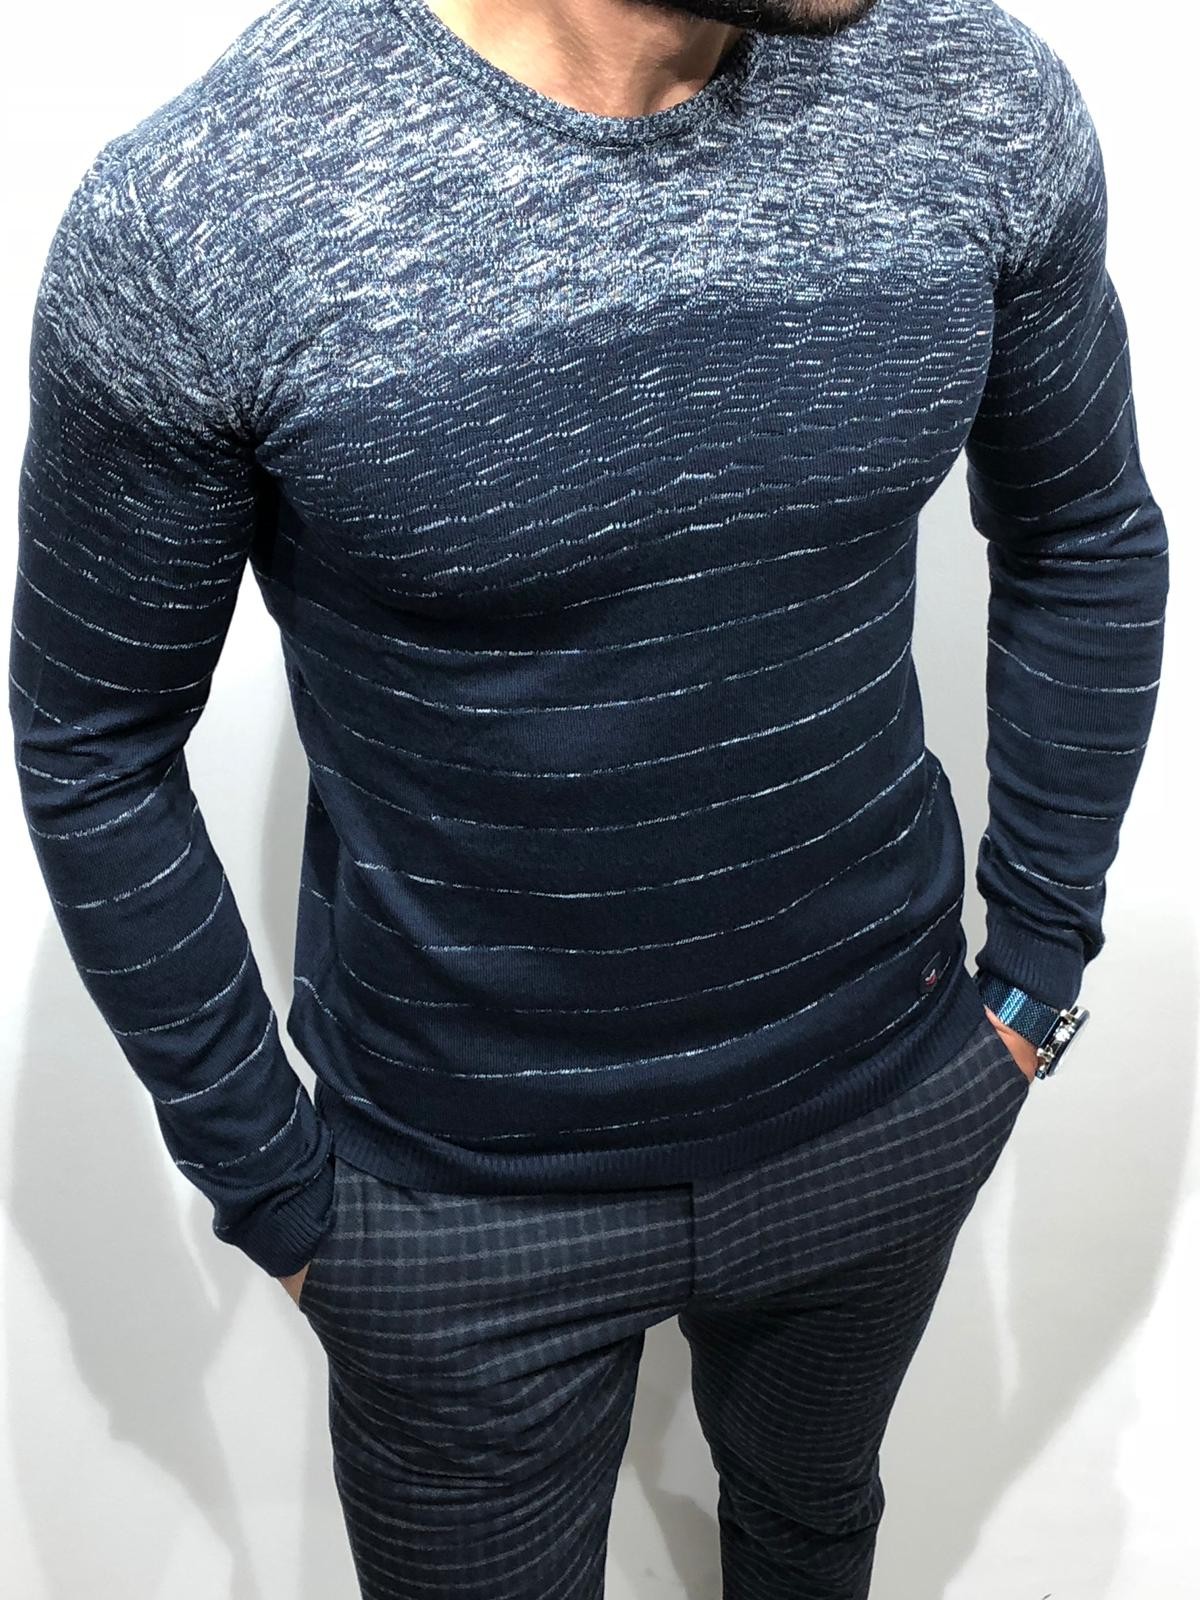 Buy Navy Blue Slim Fit Sweater by Gentwith.com with Free Shipping